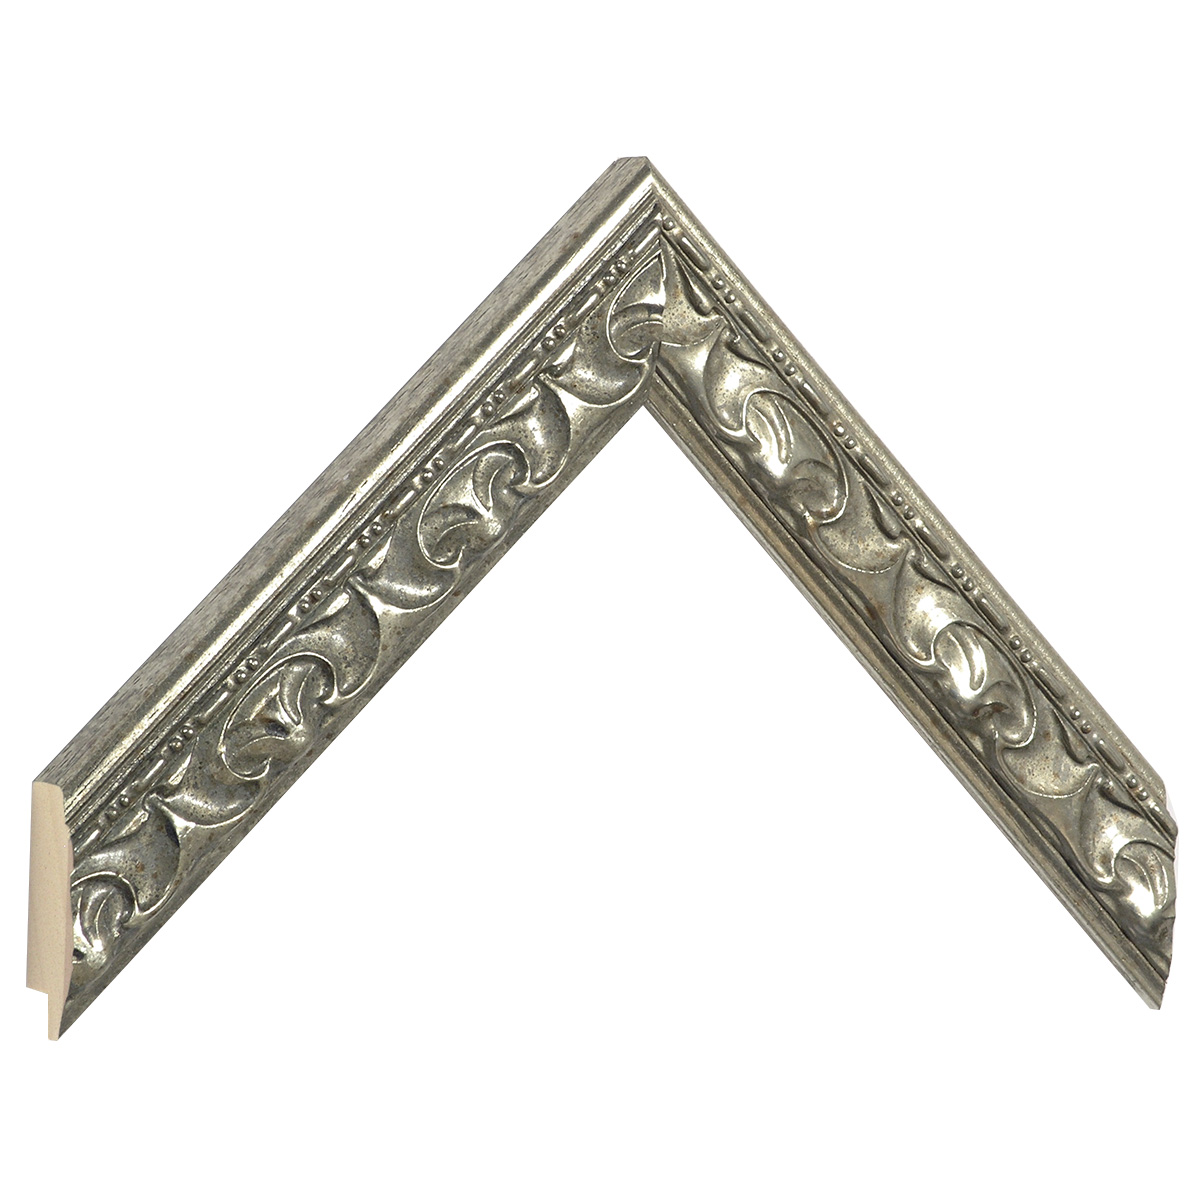 Moulding ayous silver with relief decorations - Sample